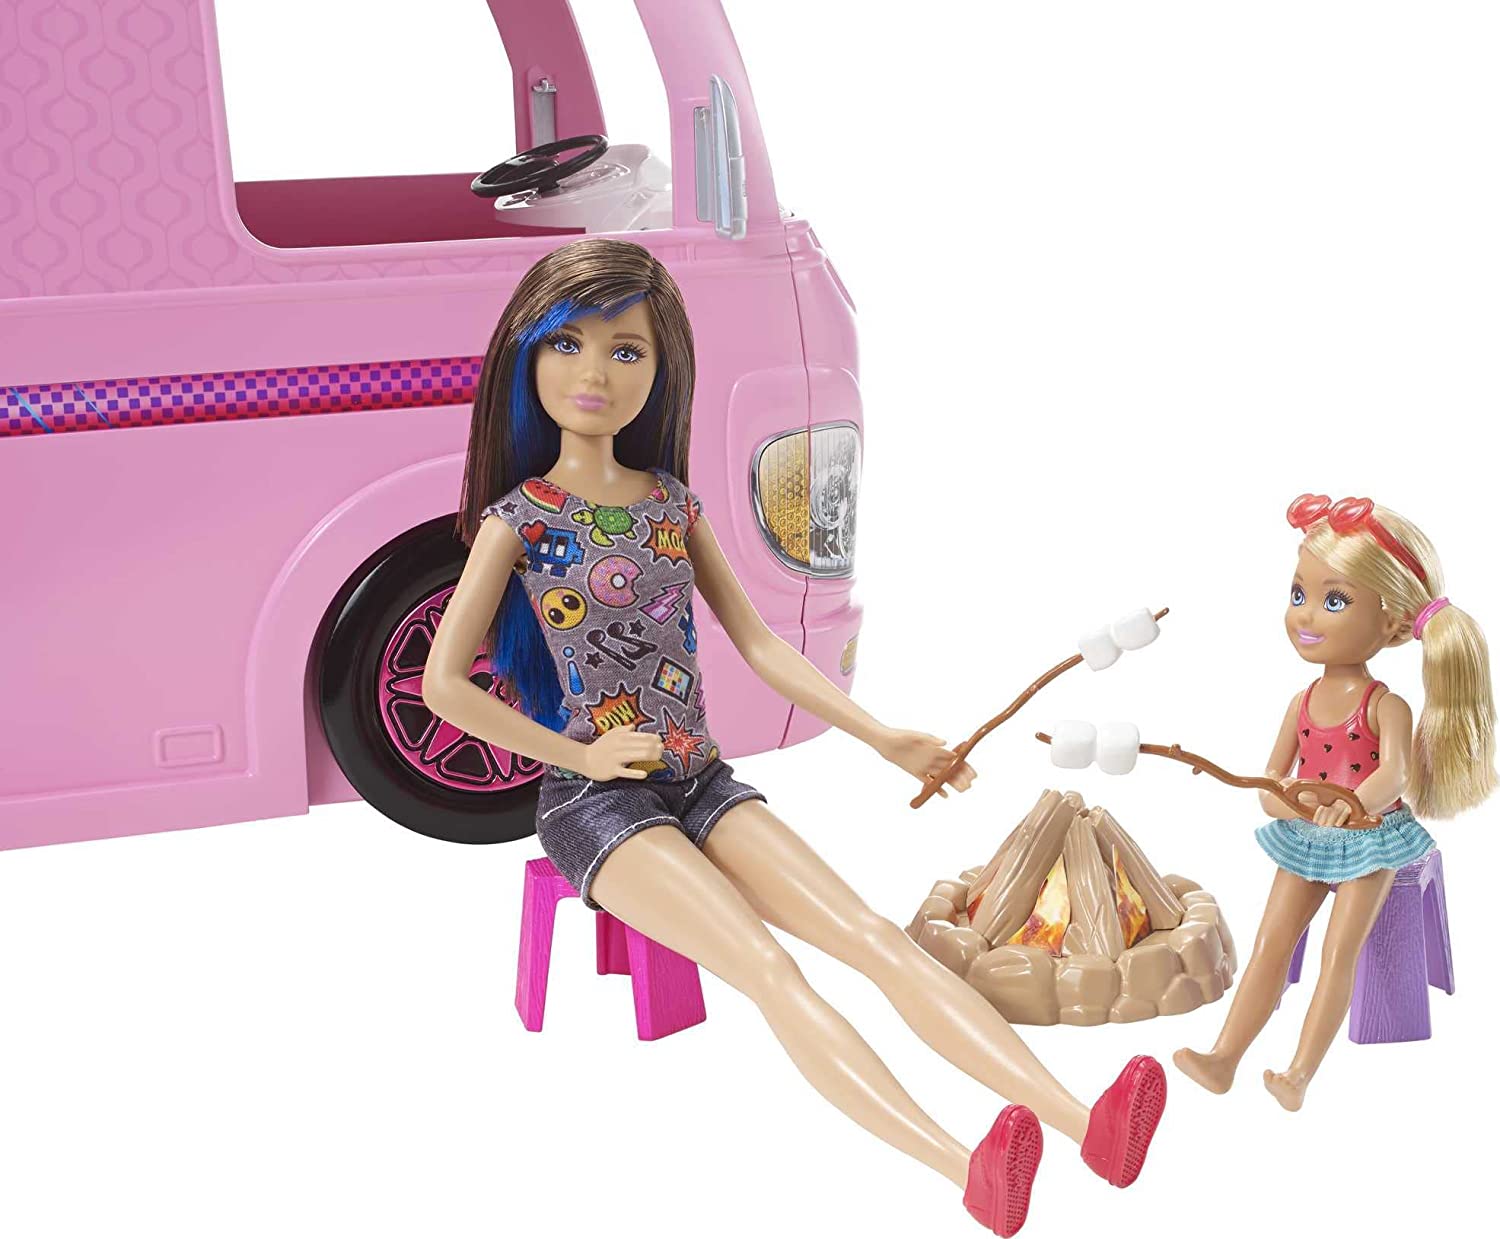 Barbie Camper Playset With Barbie Accessories, Pool And Furniture